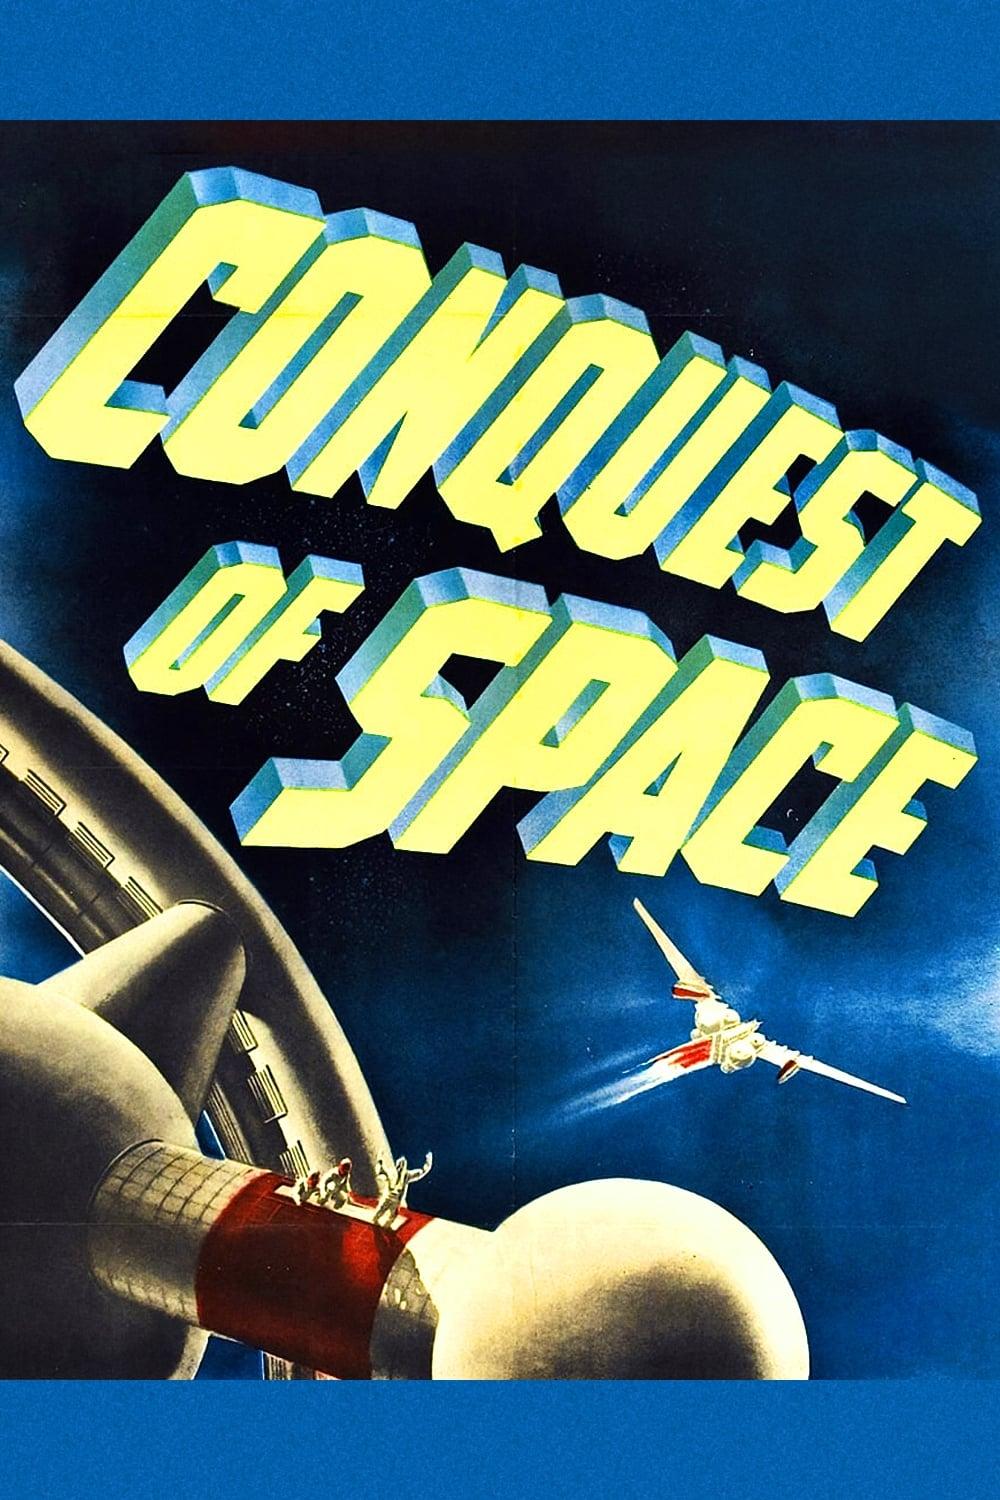 Conquest of Space poster